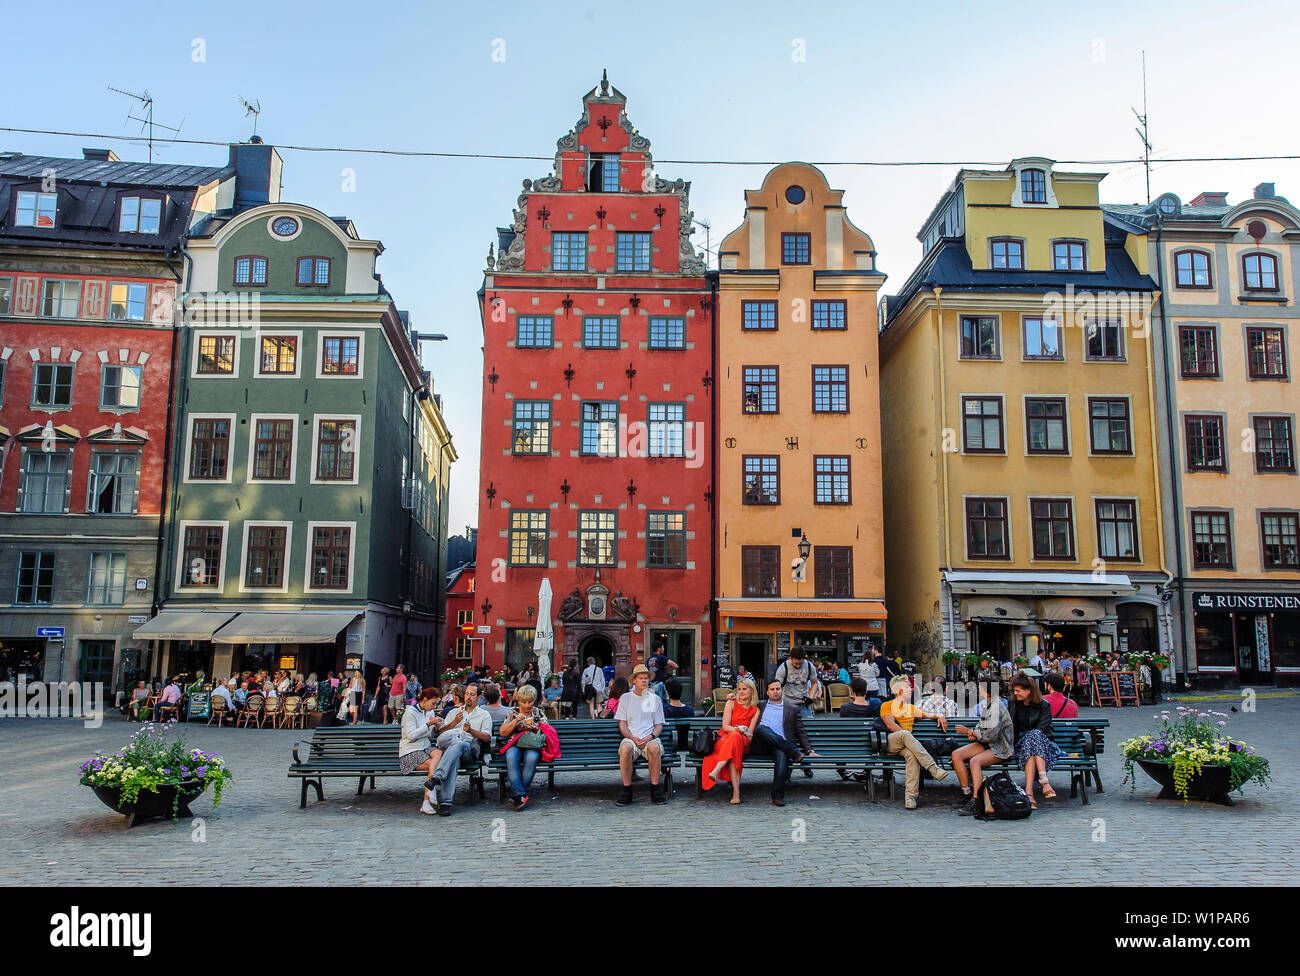 People sit on park benches in the main square Stortorget in the old town Gamla Stan, Stockholm, Sweden Stock Photo